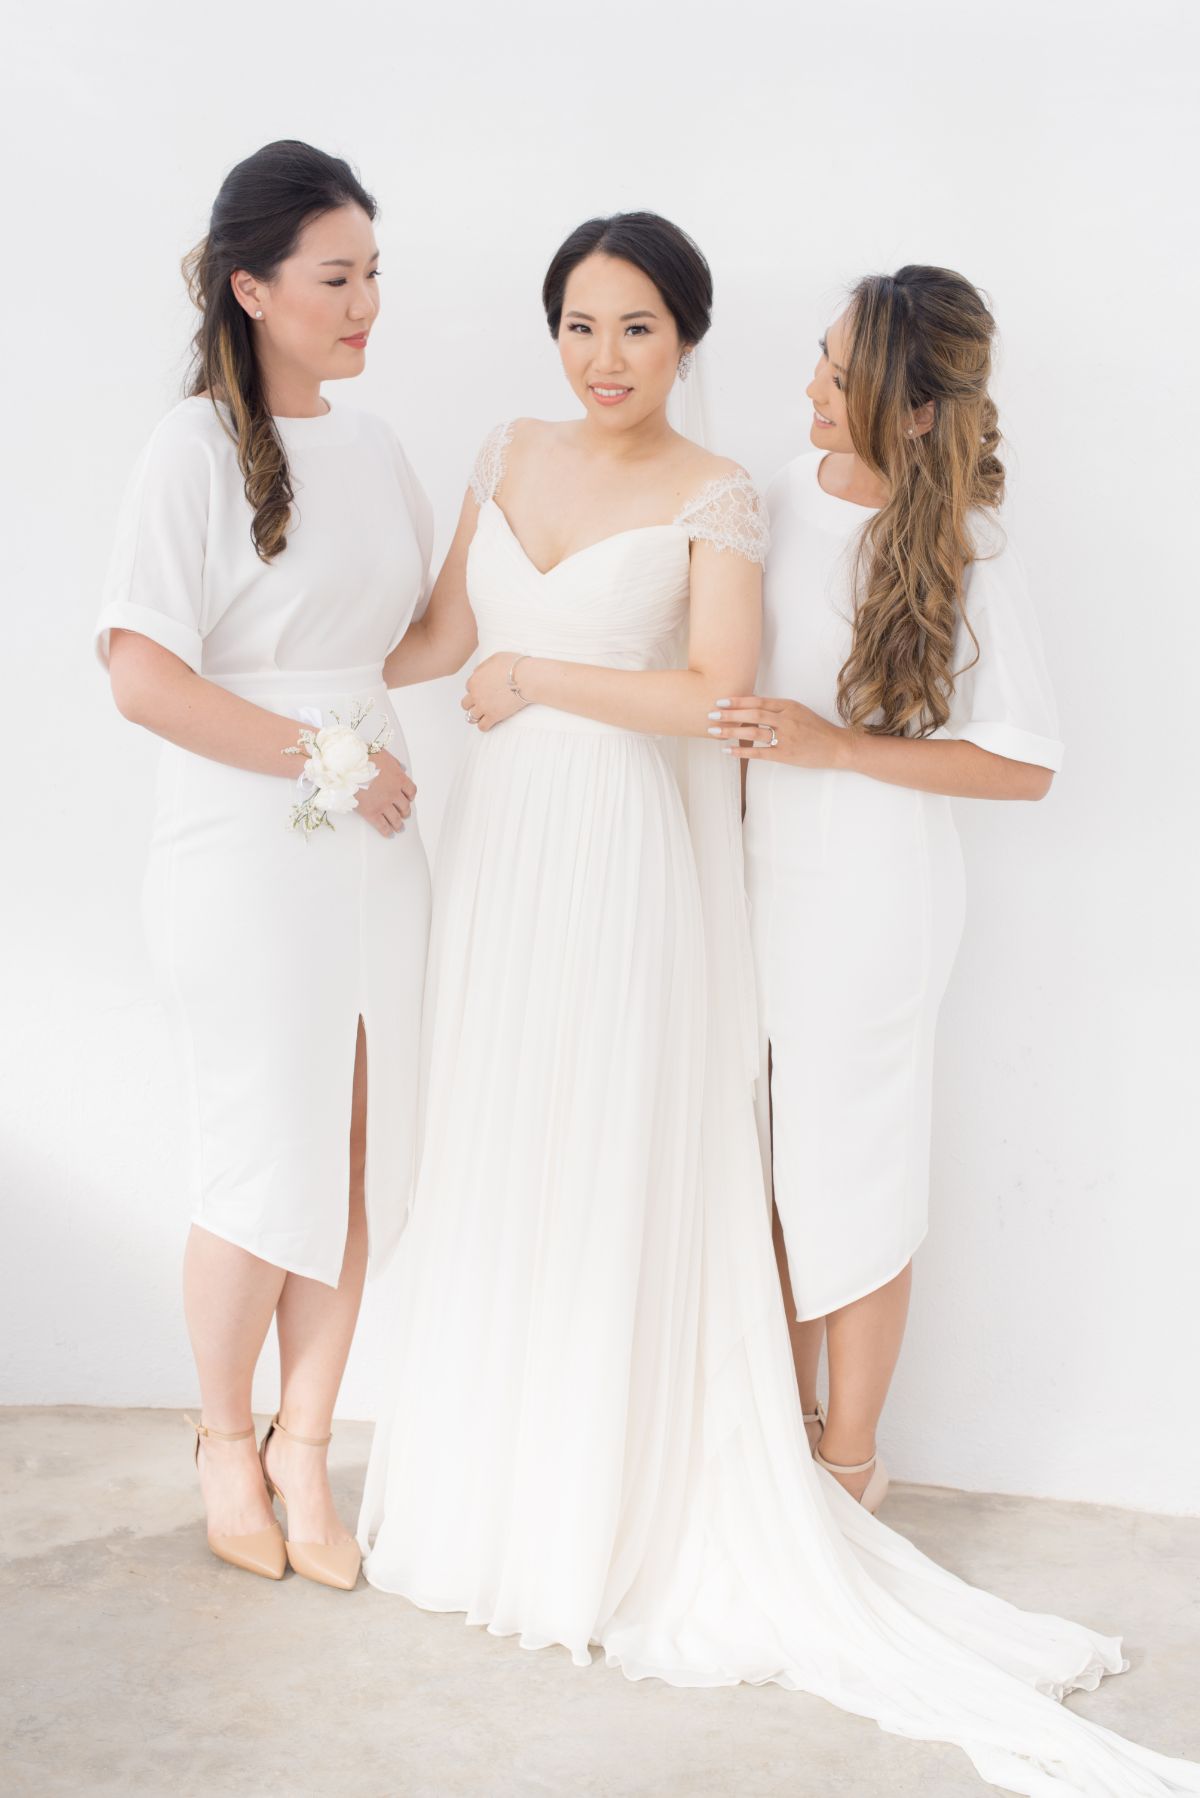 bridesmaids styling tips - wedding photographer greece - bride with her bridesmaids in white